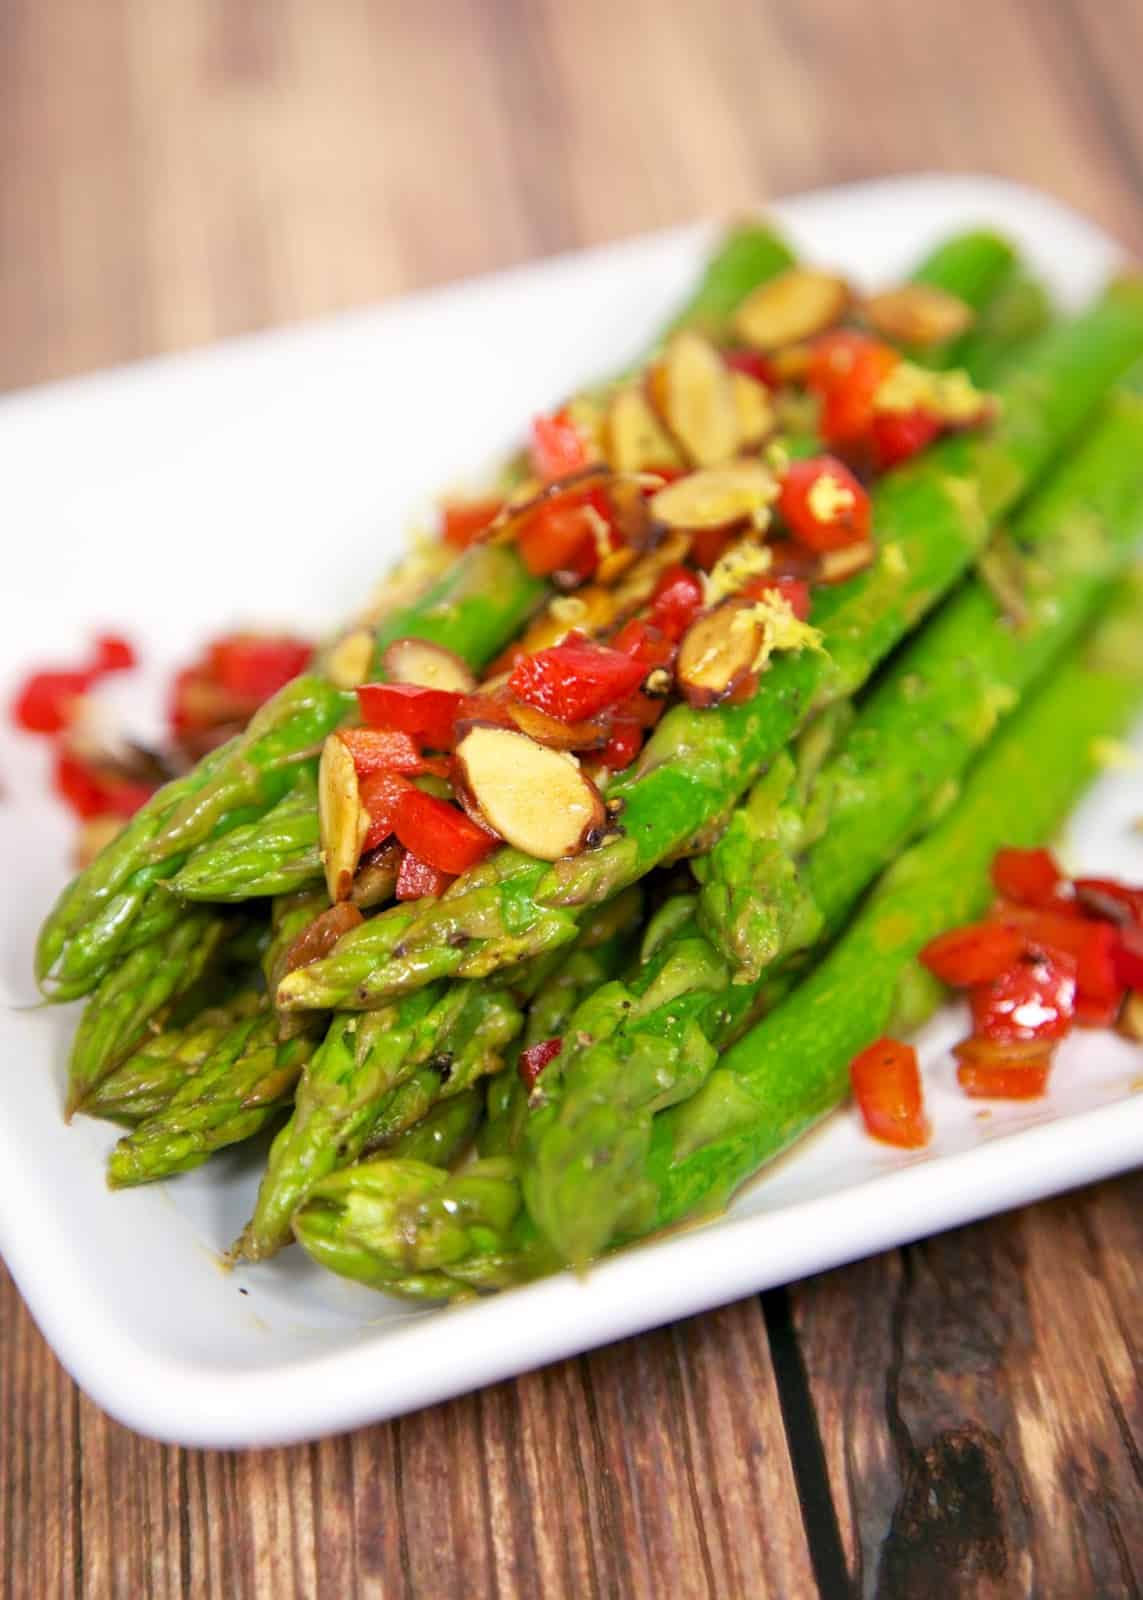 Asparagus Amandine - fresh asparagus, red bell pepper, almonds, butter and lemon juice. Ready in minutes!